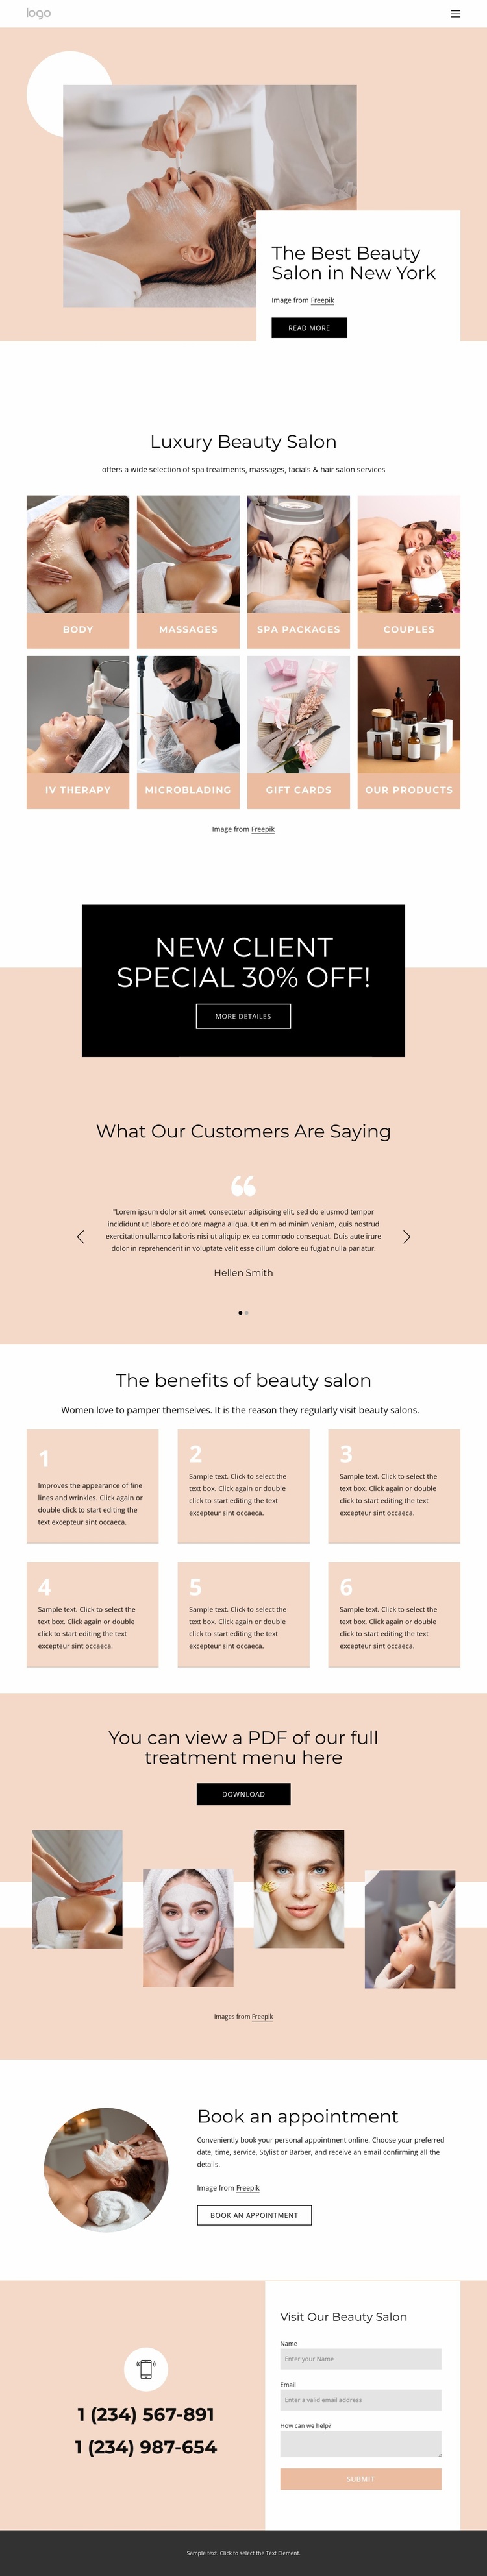 The best beauty salon in NYC Website Template